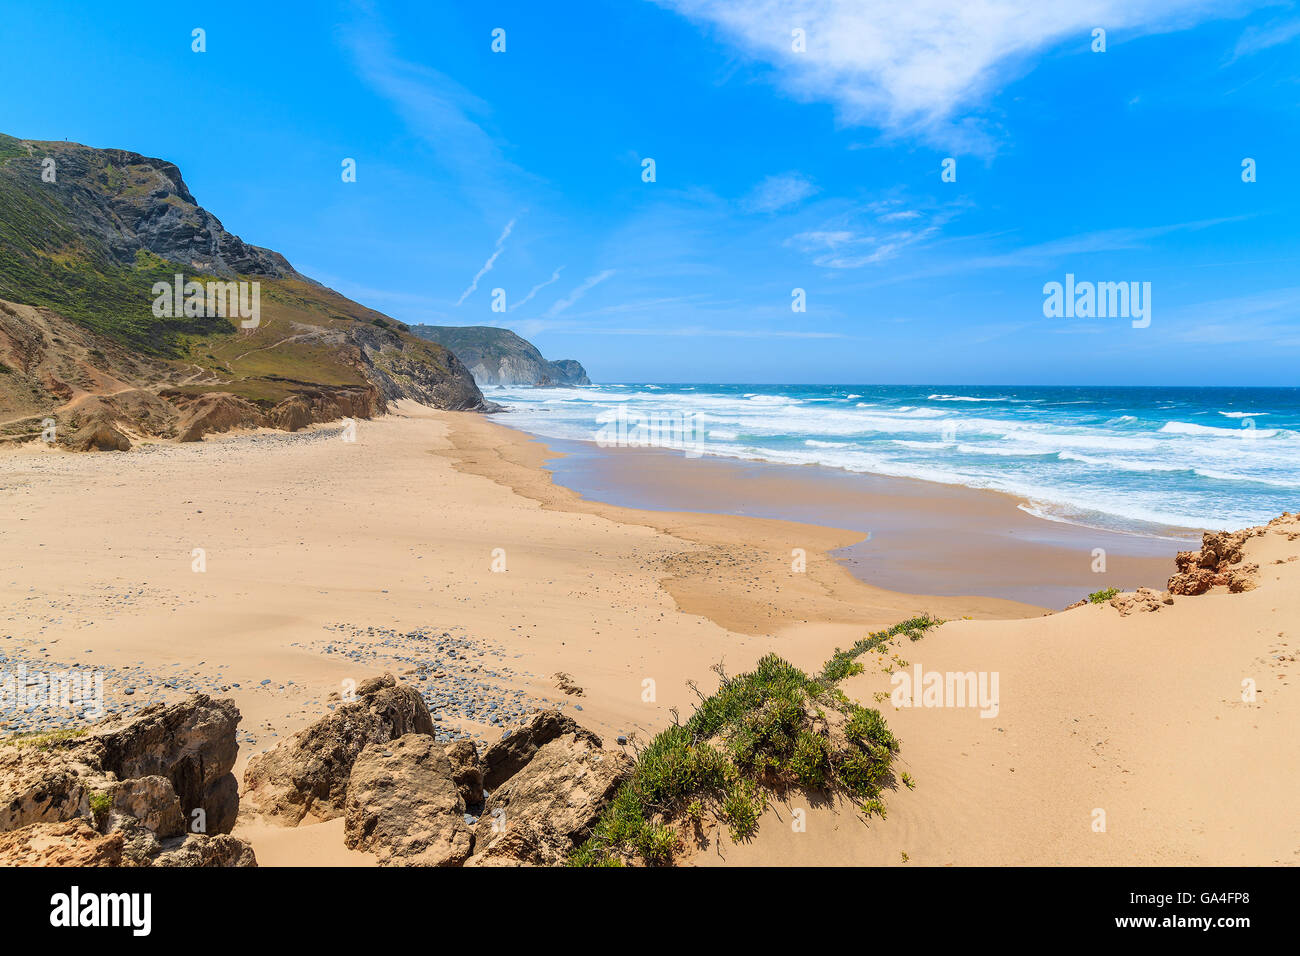 A view of sandy Castelejo beach, famous place for surfing, Algarve region, Portugal Stock Photo